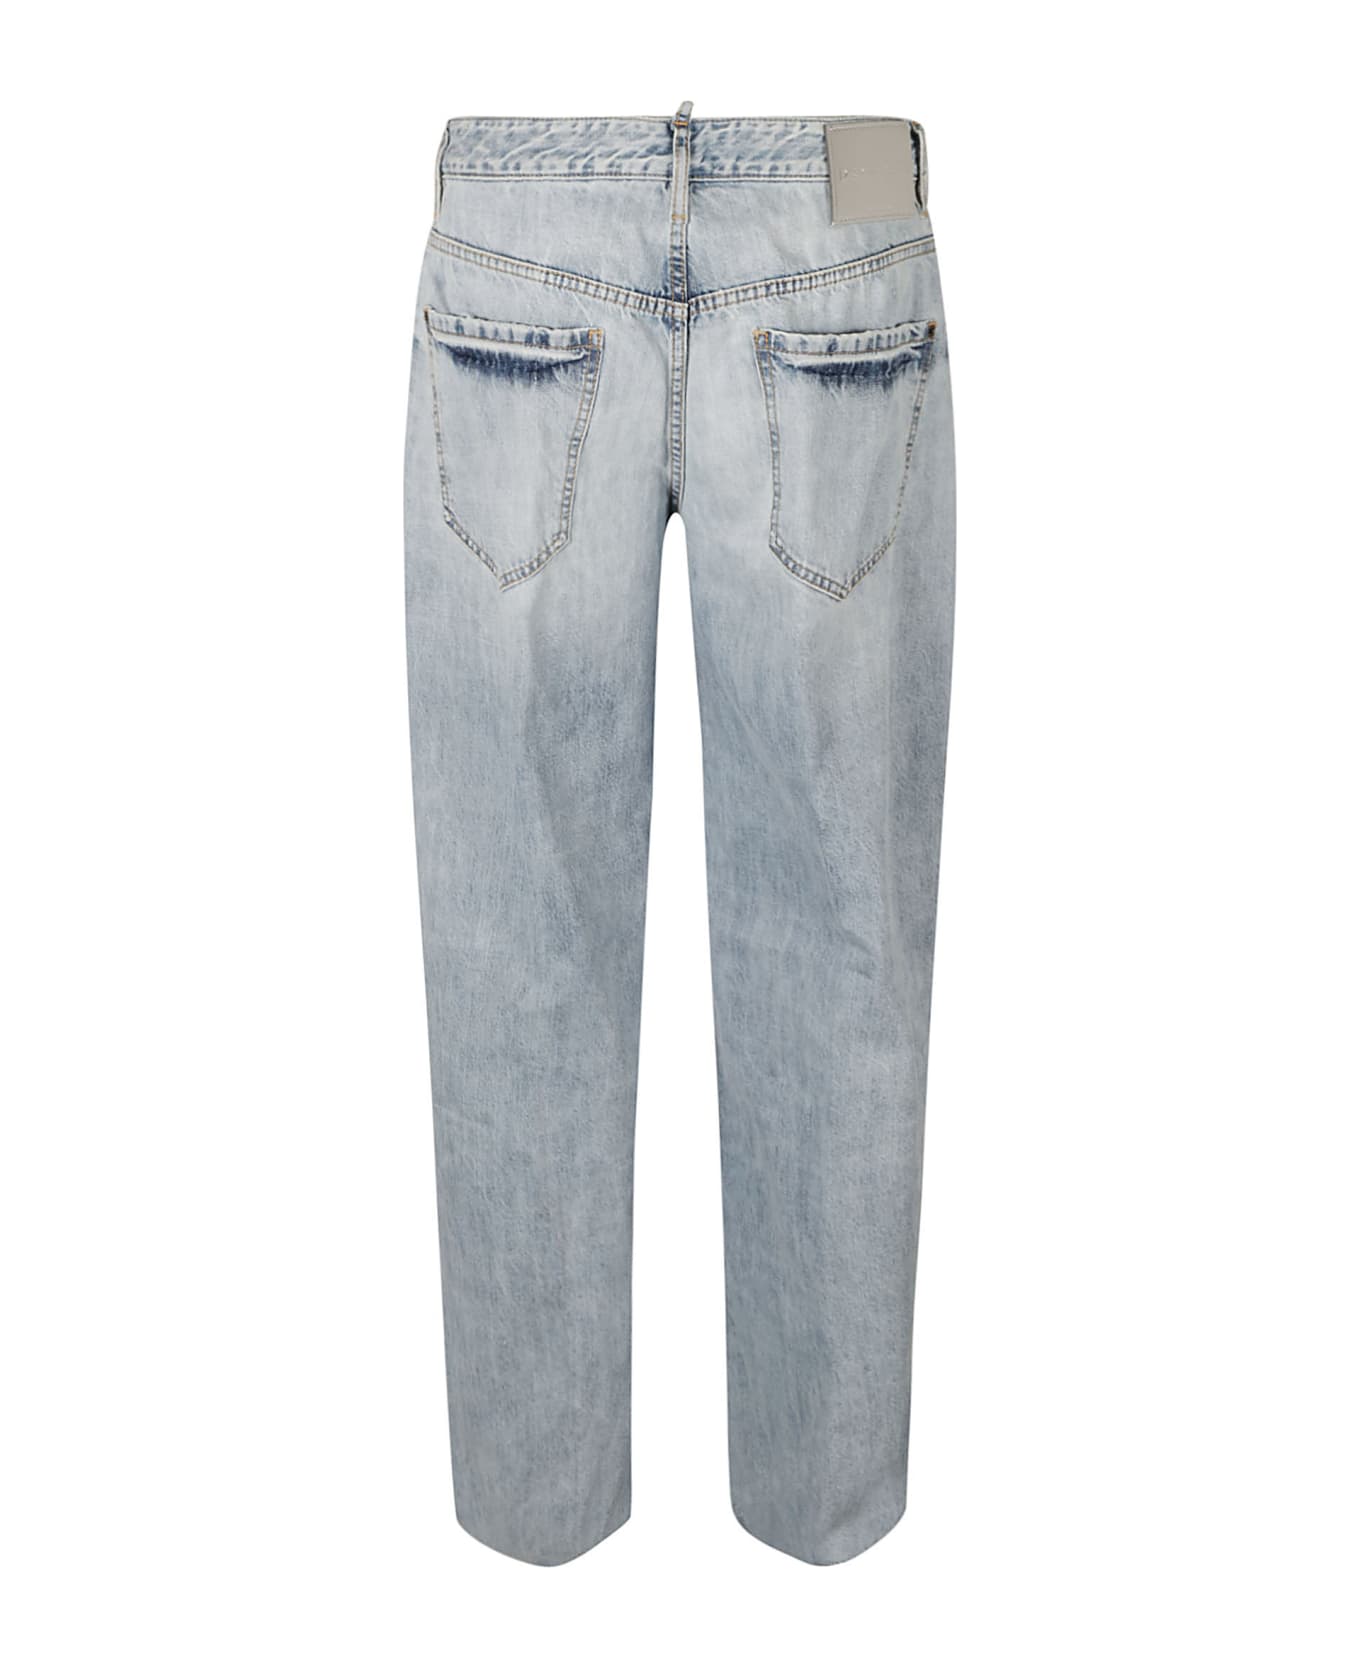 Dsquared2 Distressed Straight Jeans - Navy デニム